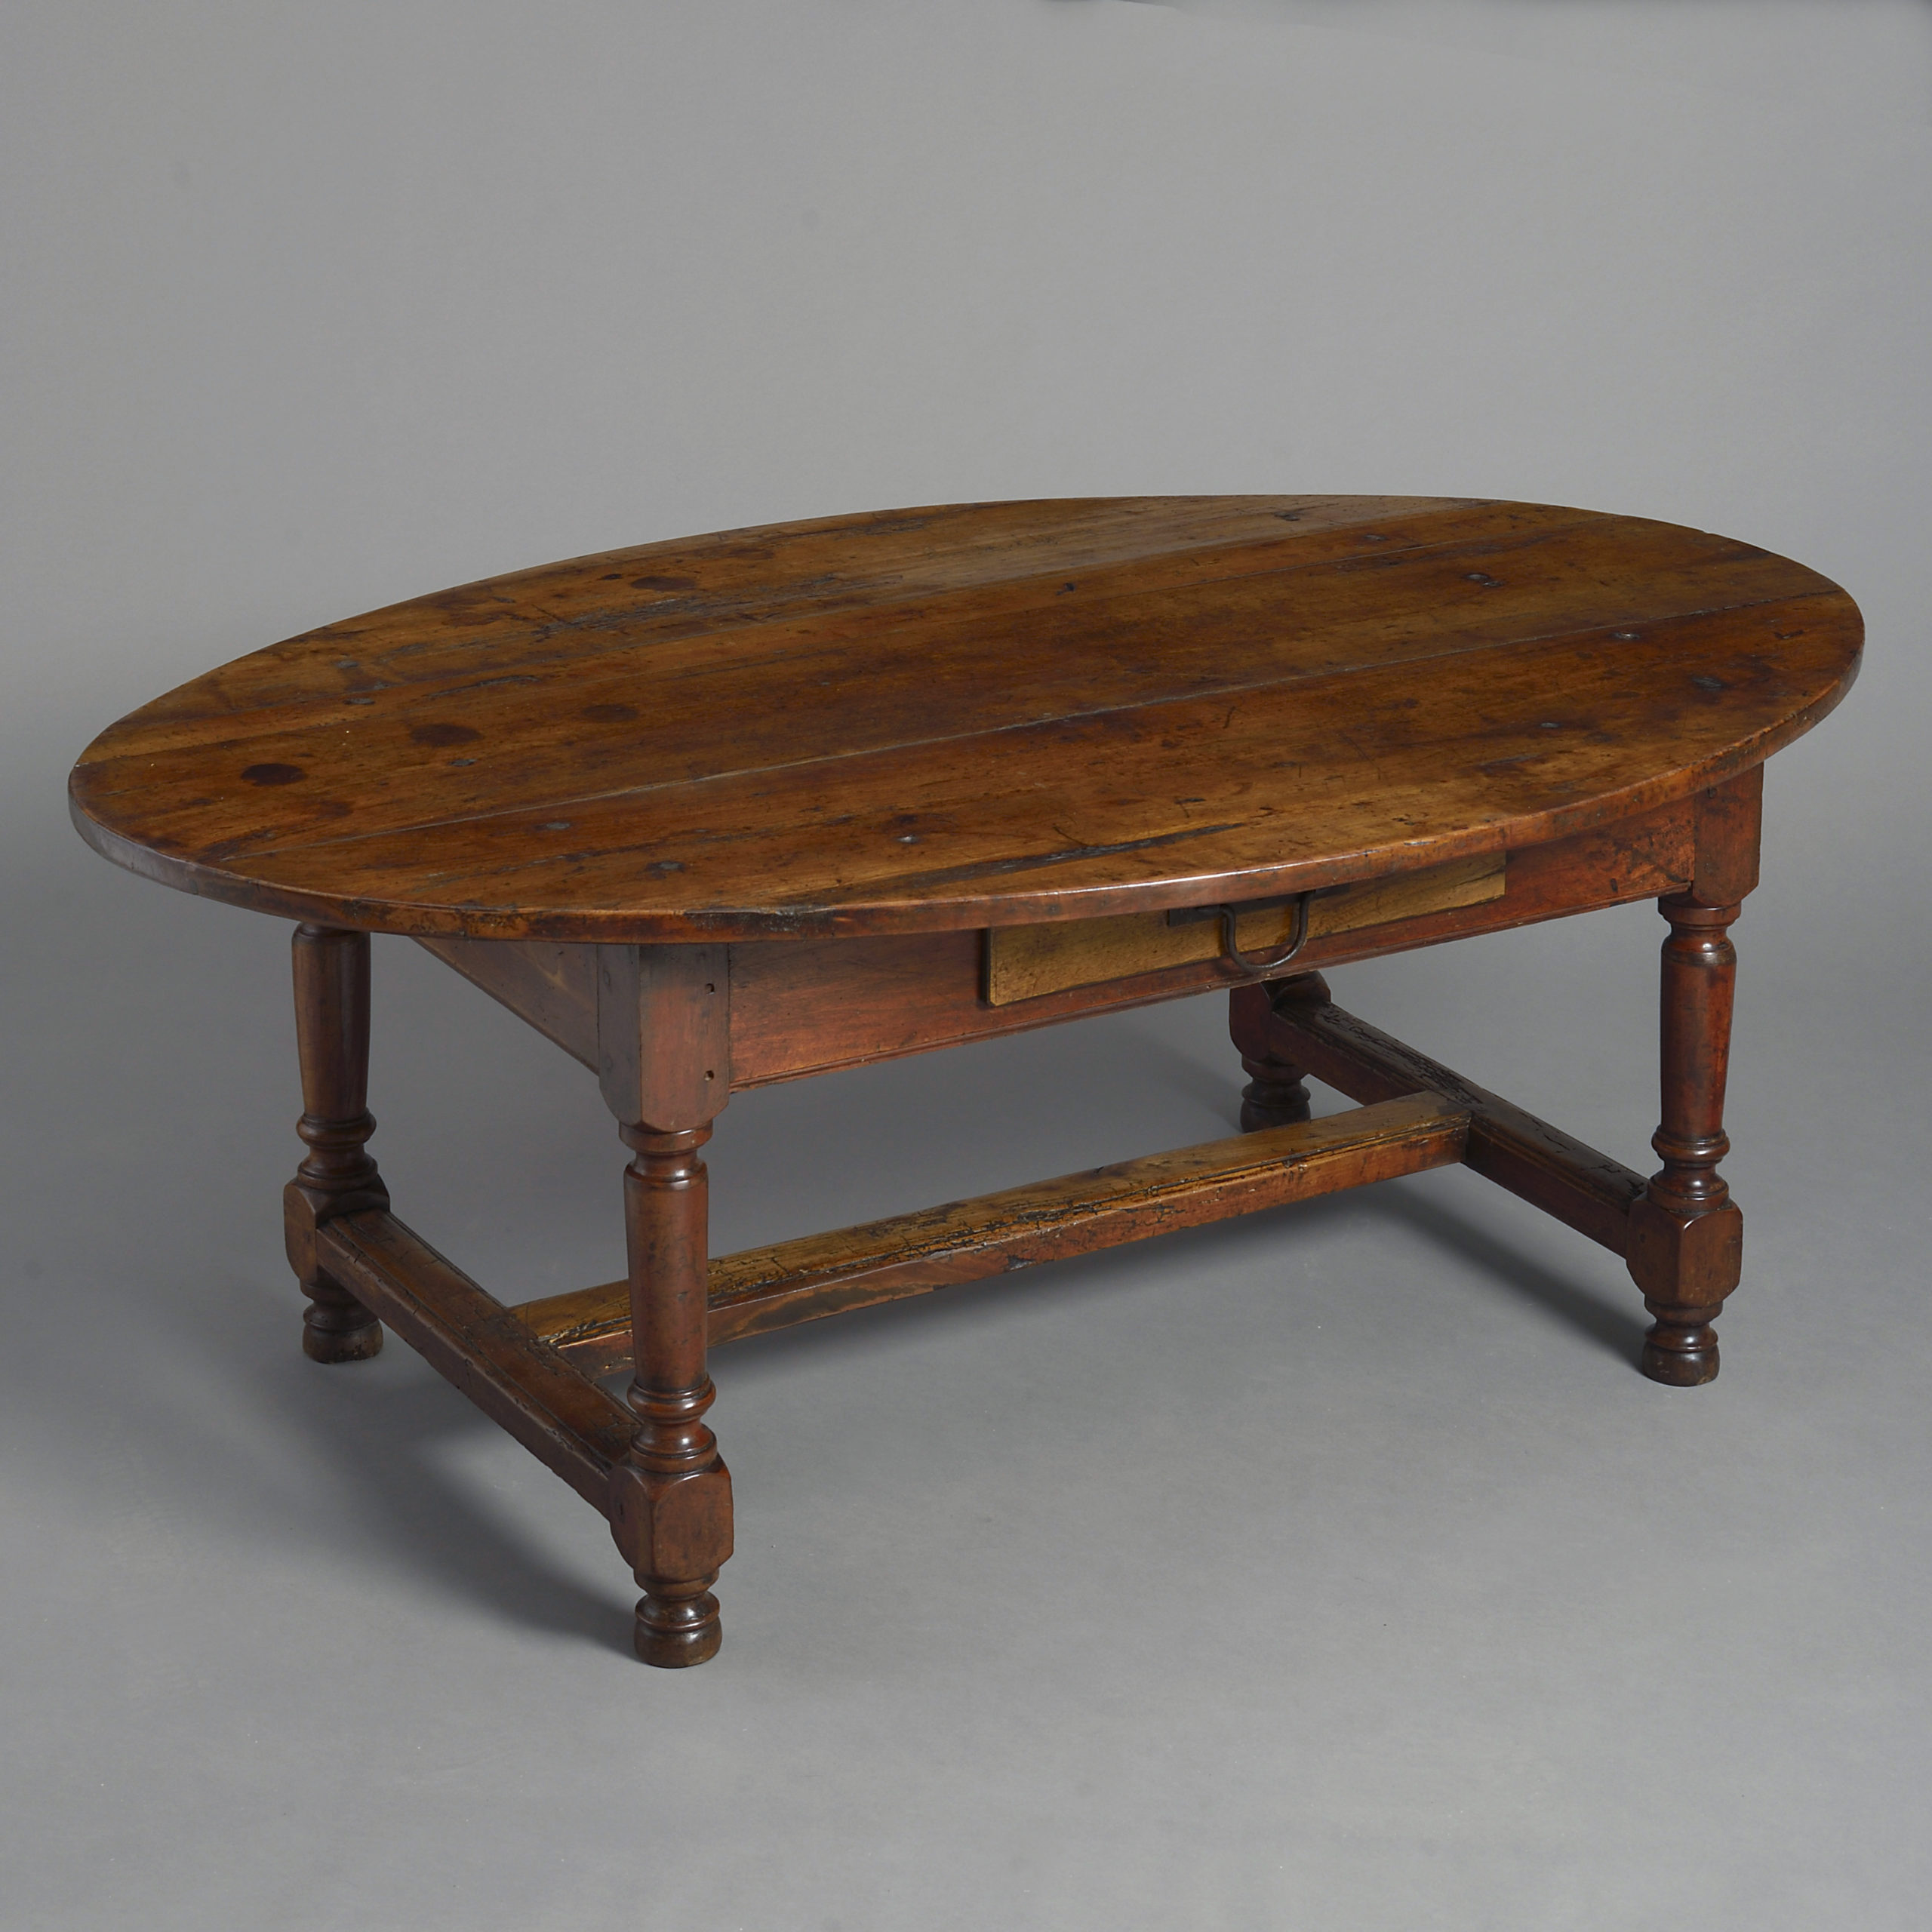 A Walnut Oval Low Table or Coffee Table | Timothy Langston Fine Art &  Antiques